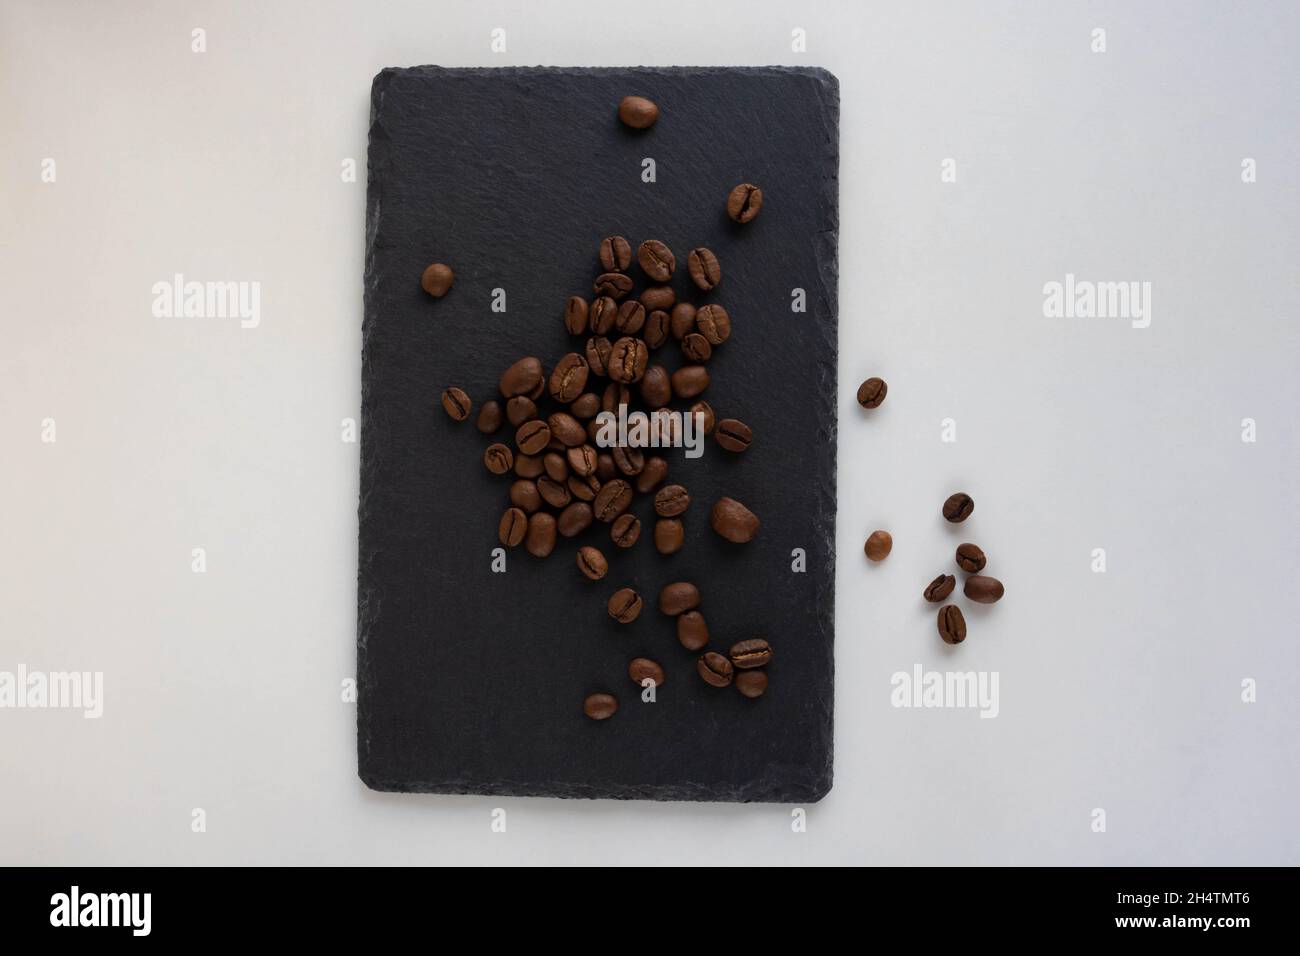 Coffee beans lie on a black plate on a white background. Stock Photo